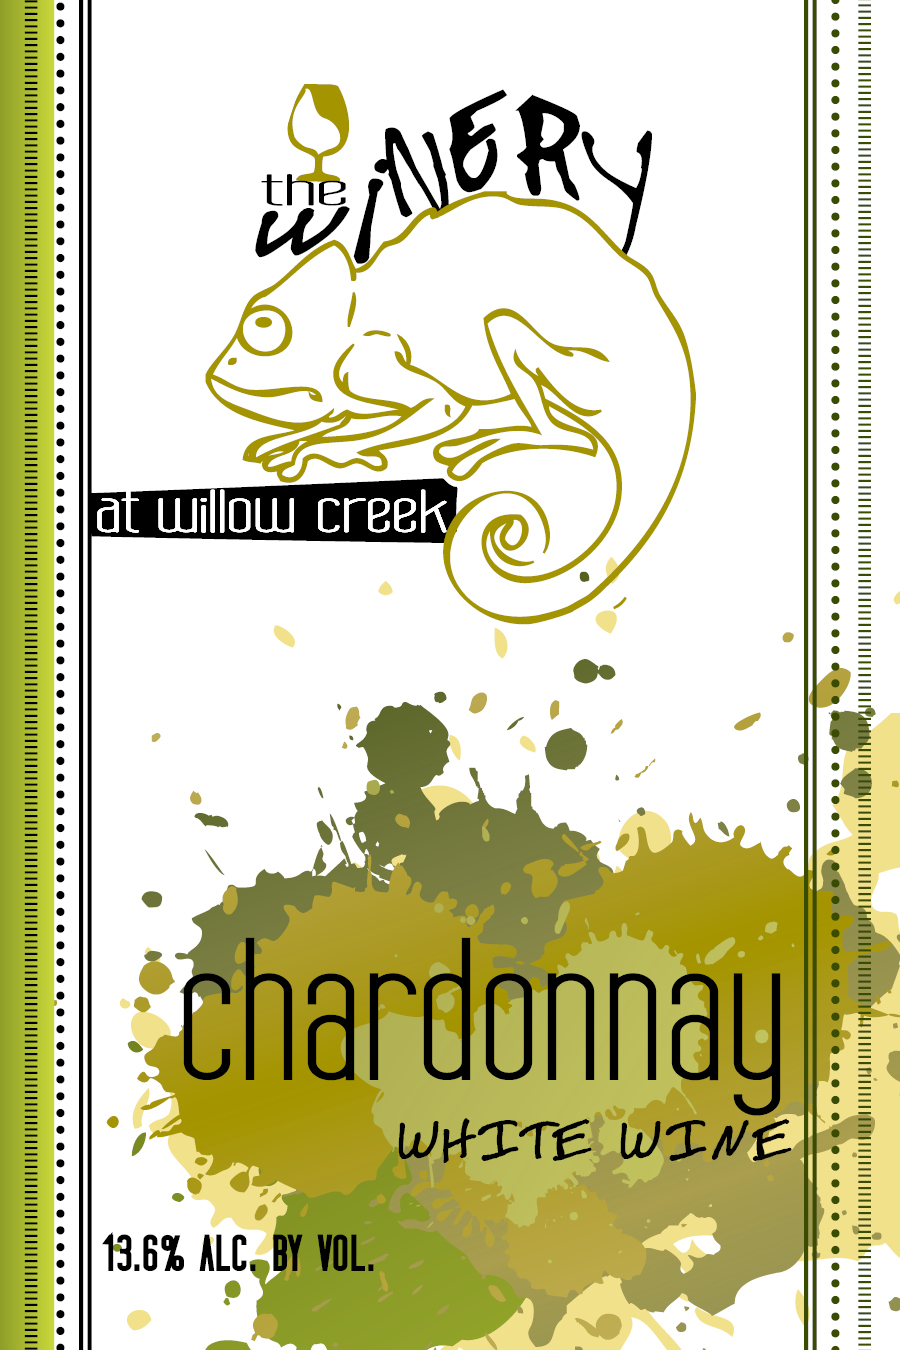 Product Image for Chardonnay